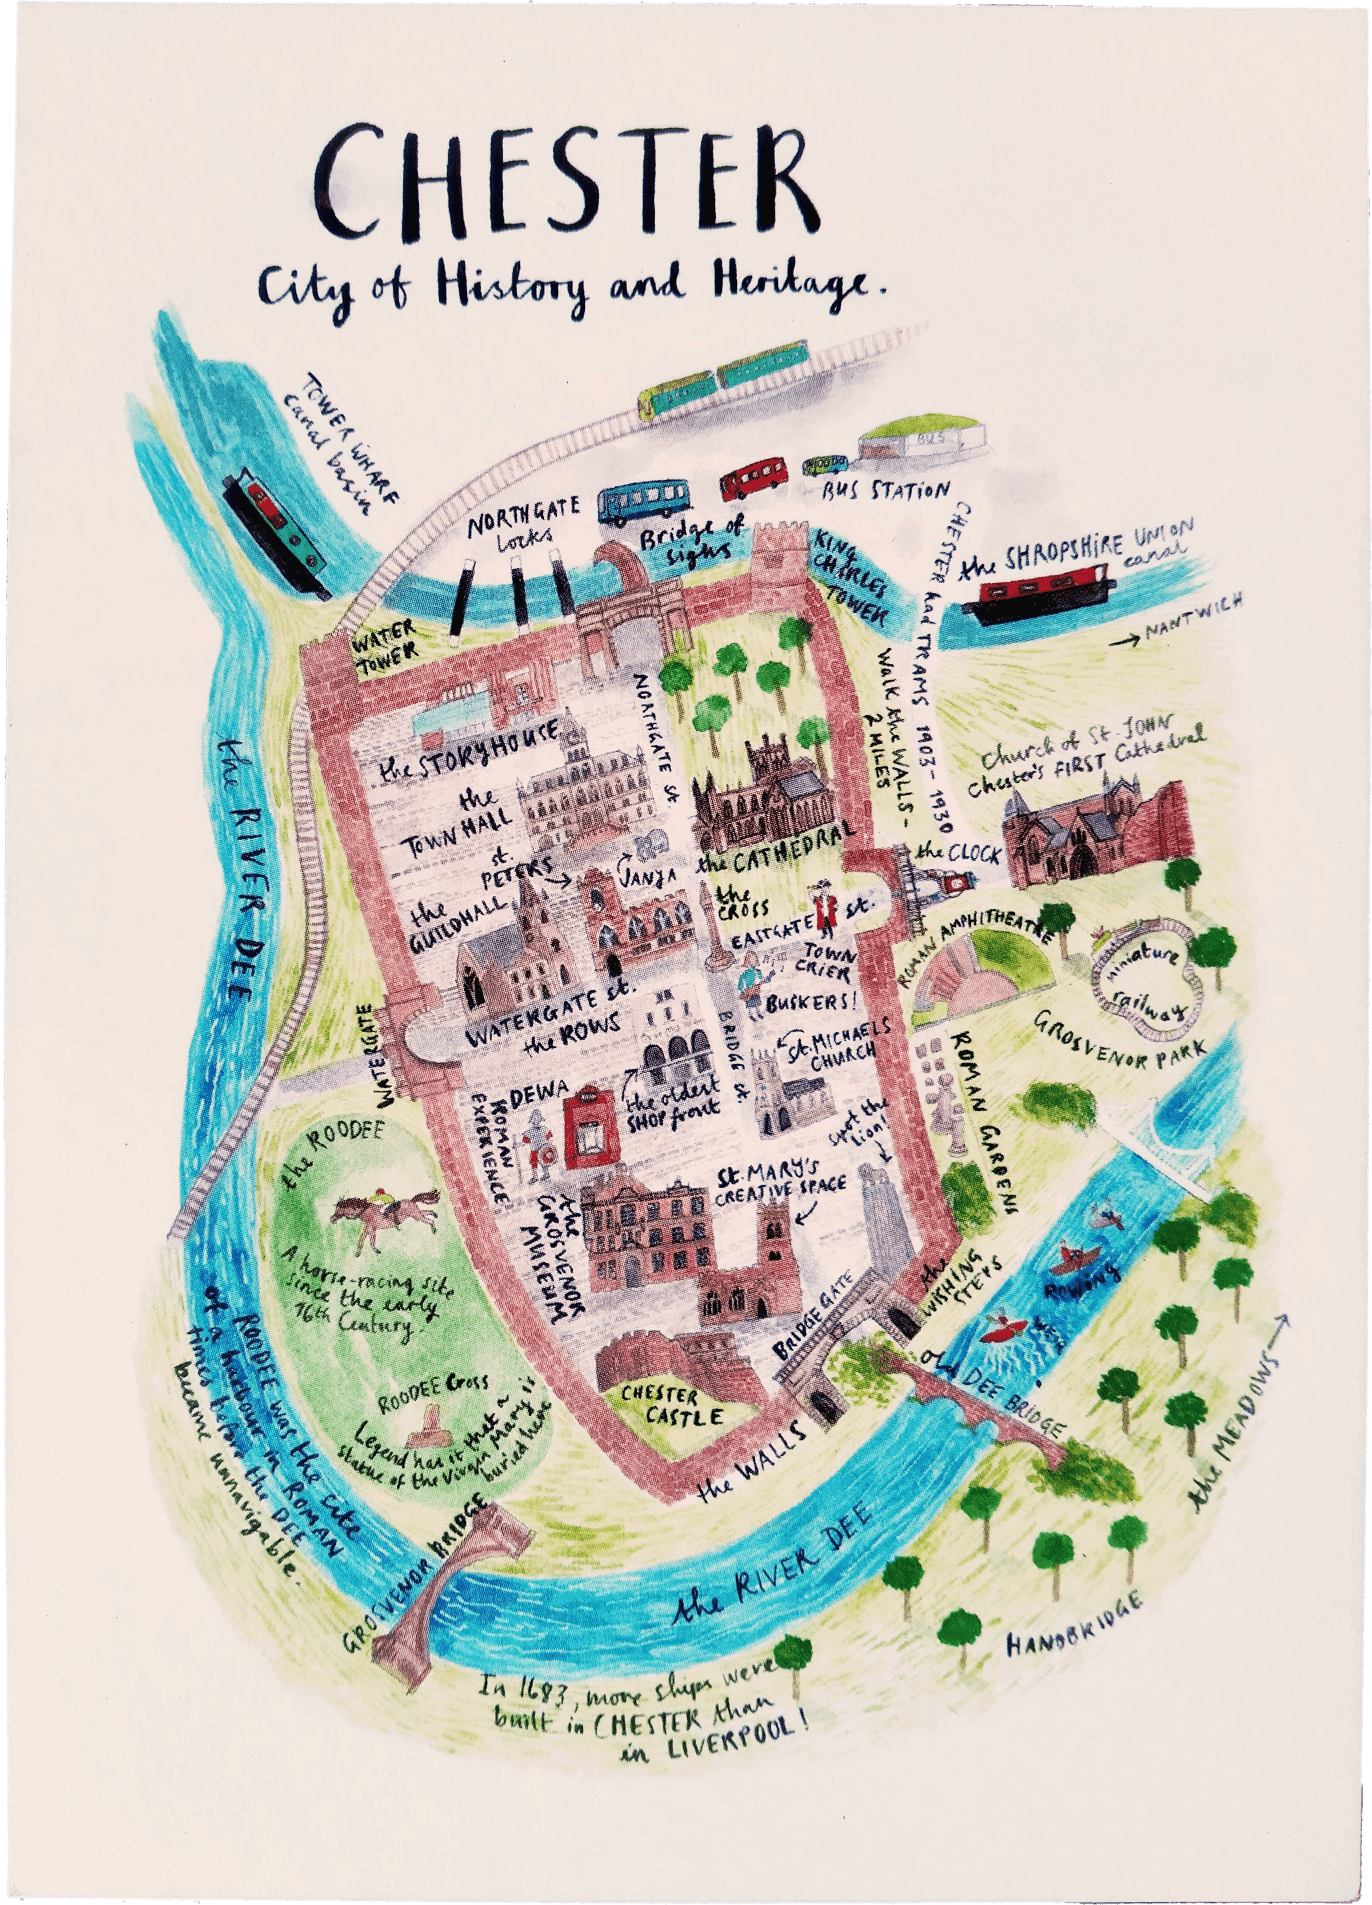 An artistic map of Chester